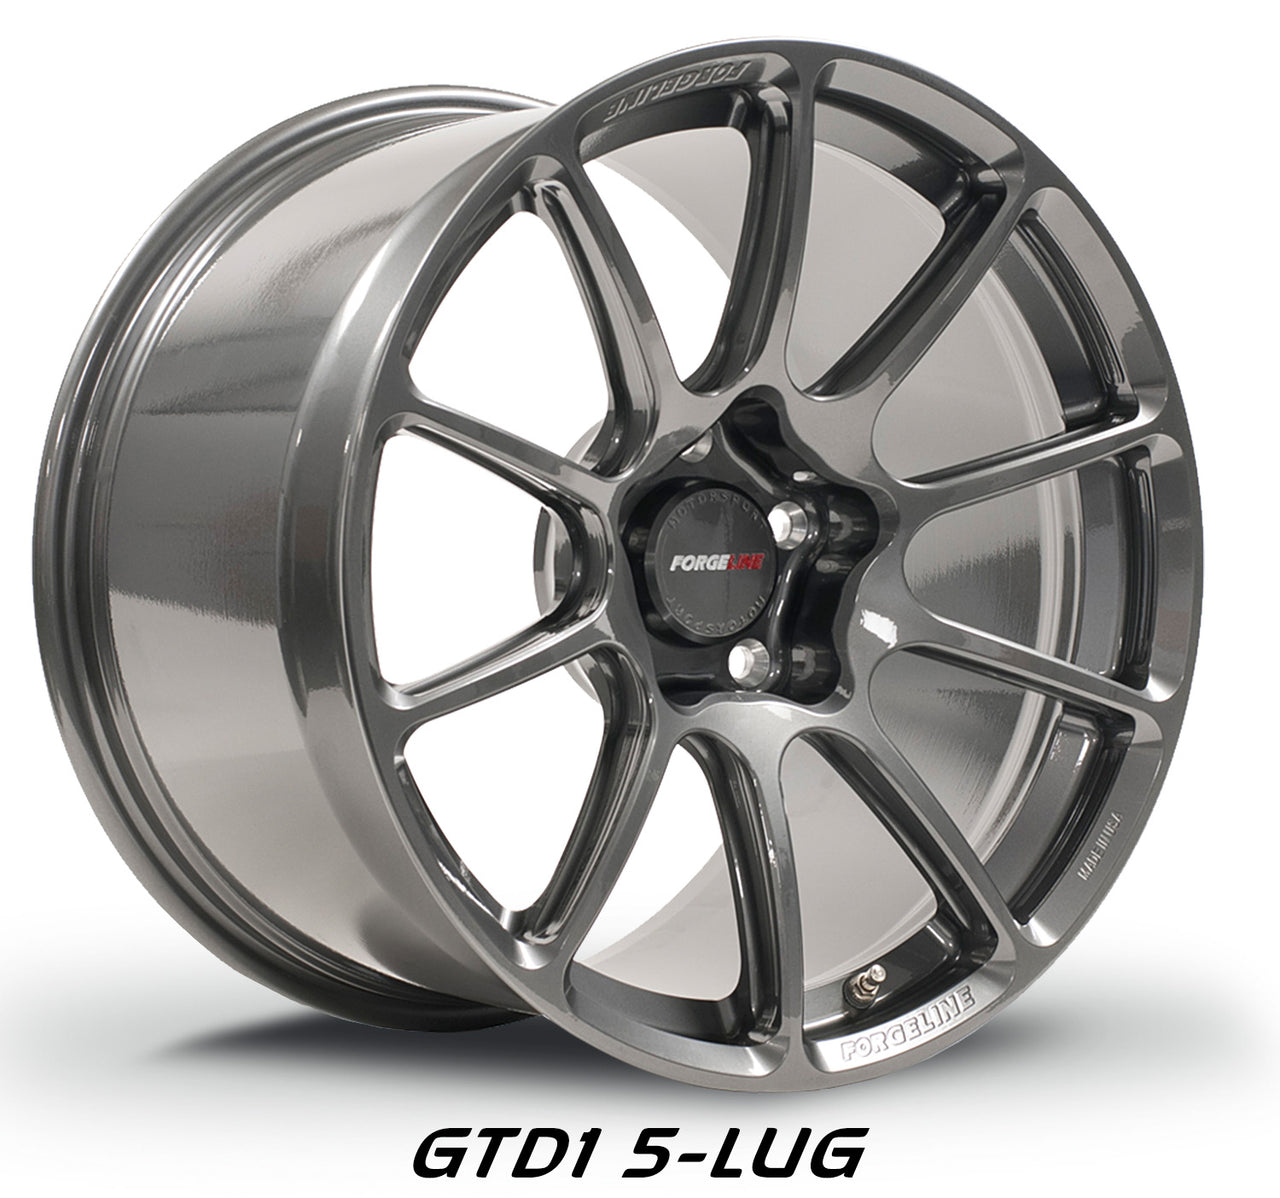 GTD1 5-Lug Pearl Gray Racing Wheel from Forgeline Wheels Motorsport Series is an excellent track day choice for the C8 Corvette